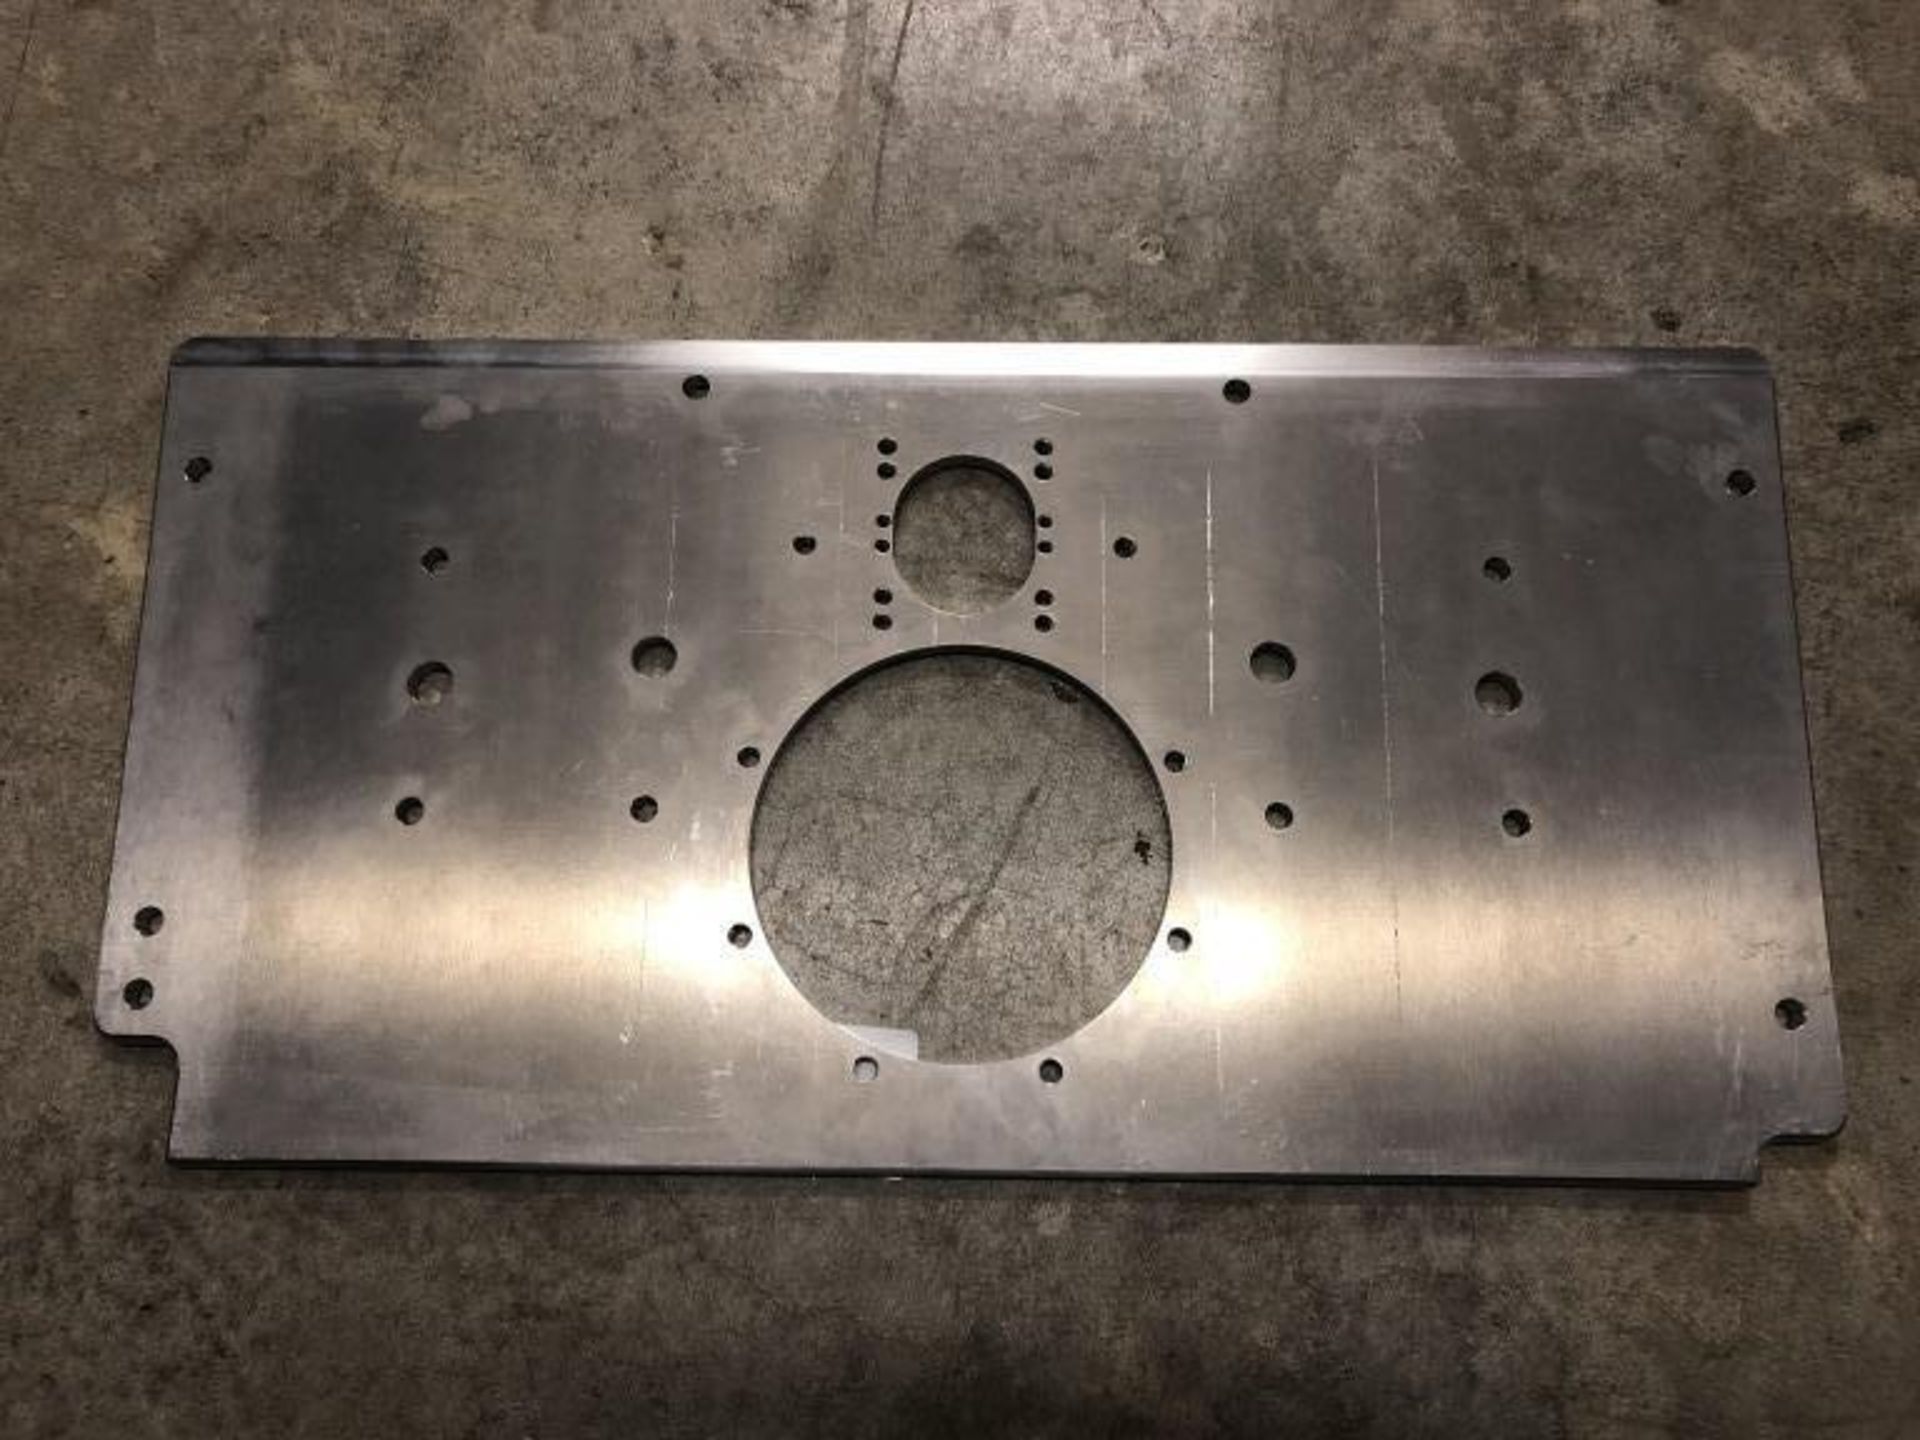 Aluminum Chevy Sprint Car Motor Plate - Image 3 of 3